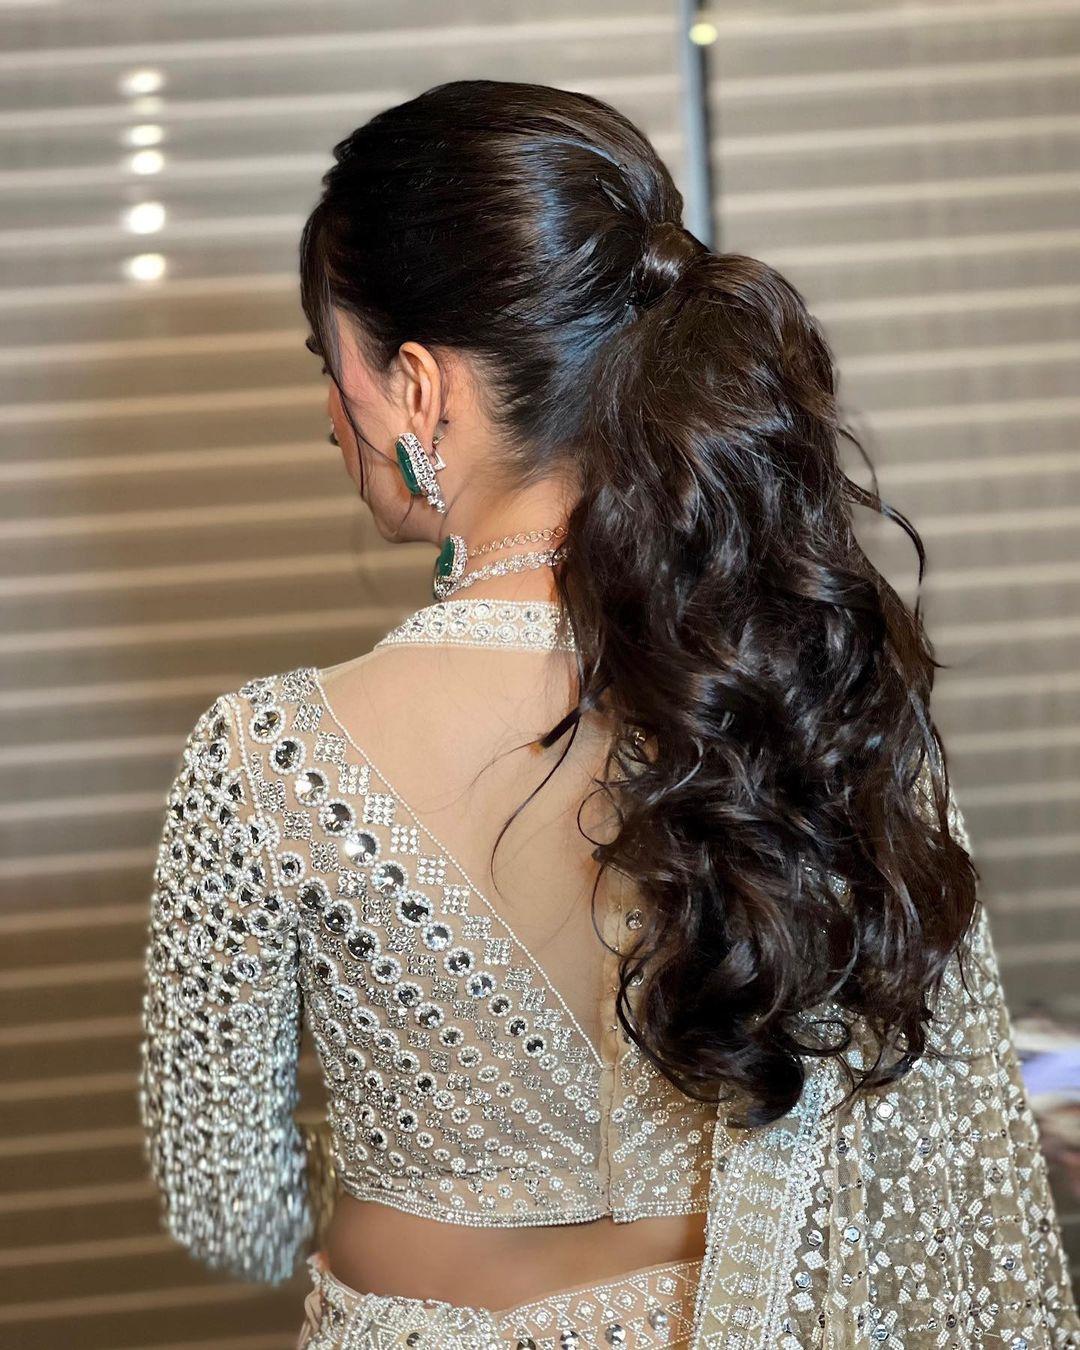 15 Gorgeous Indian Hairstyles For Women - Lead Grow Develop